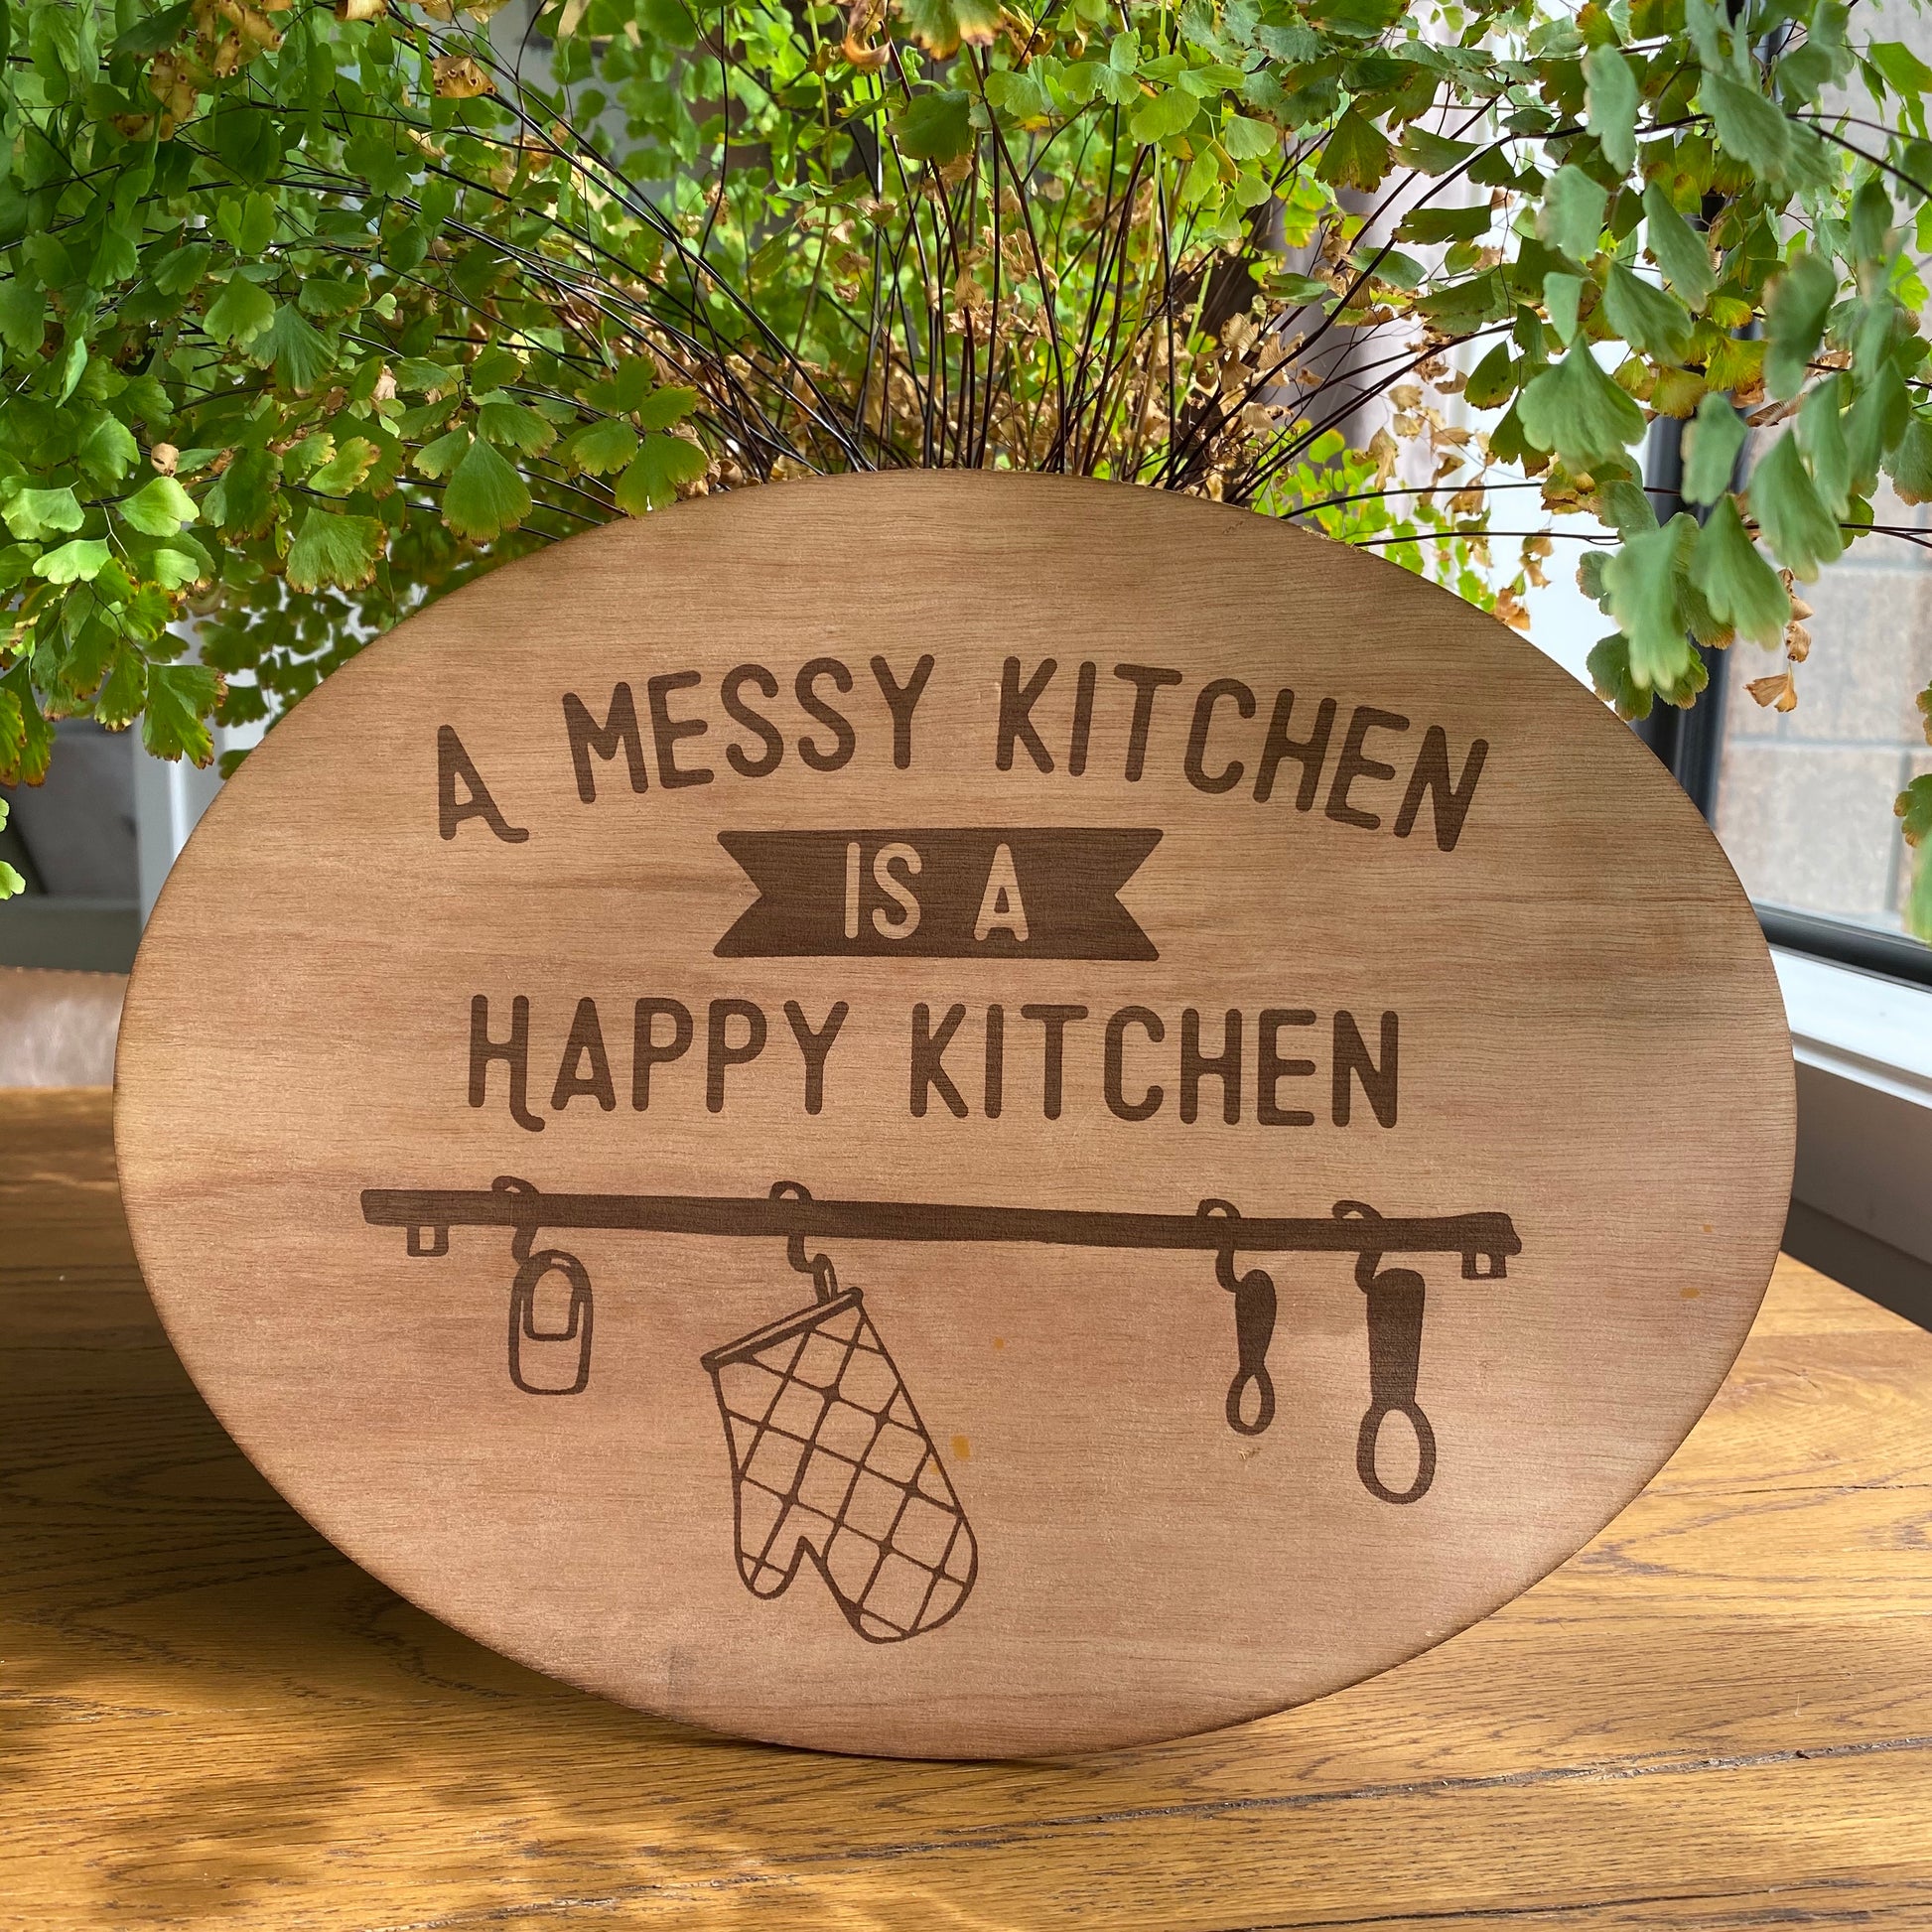 A messy kitchen is a happy kitchen - Younique Collective